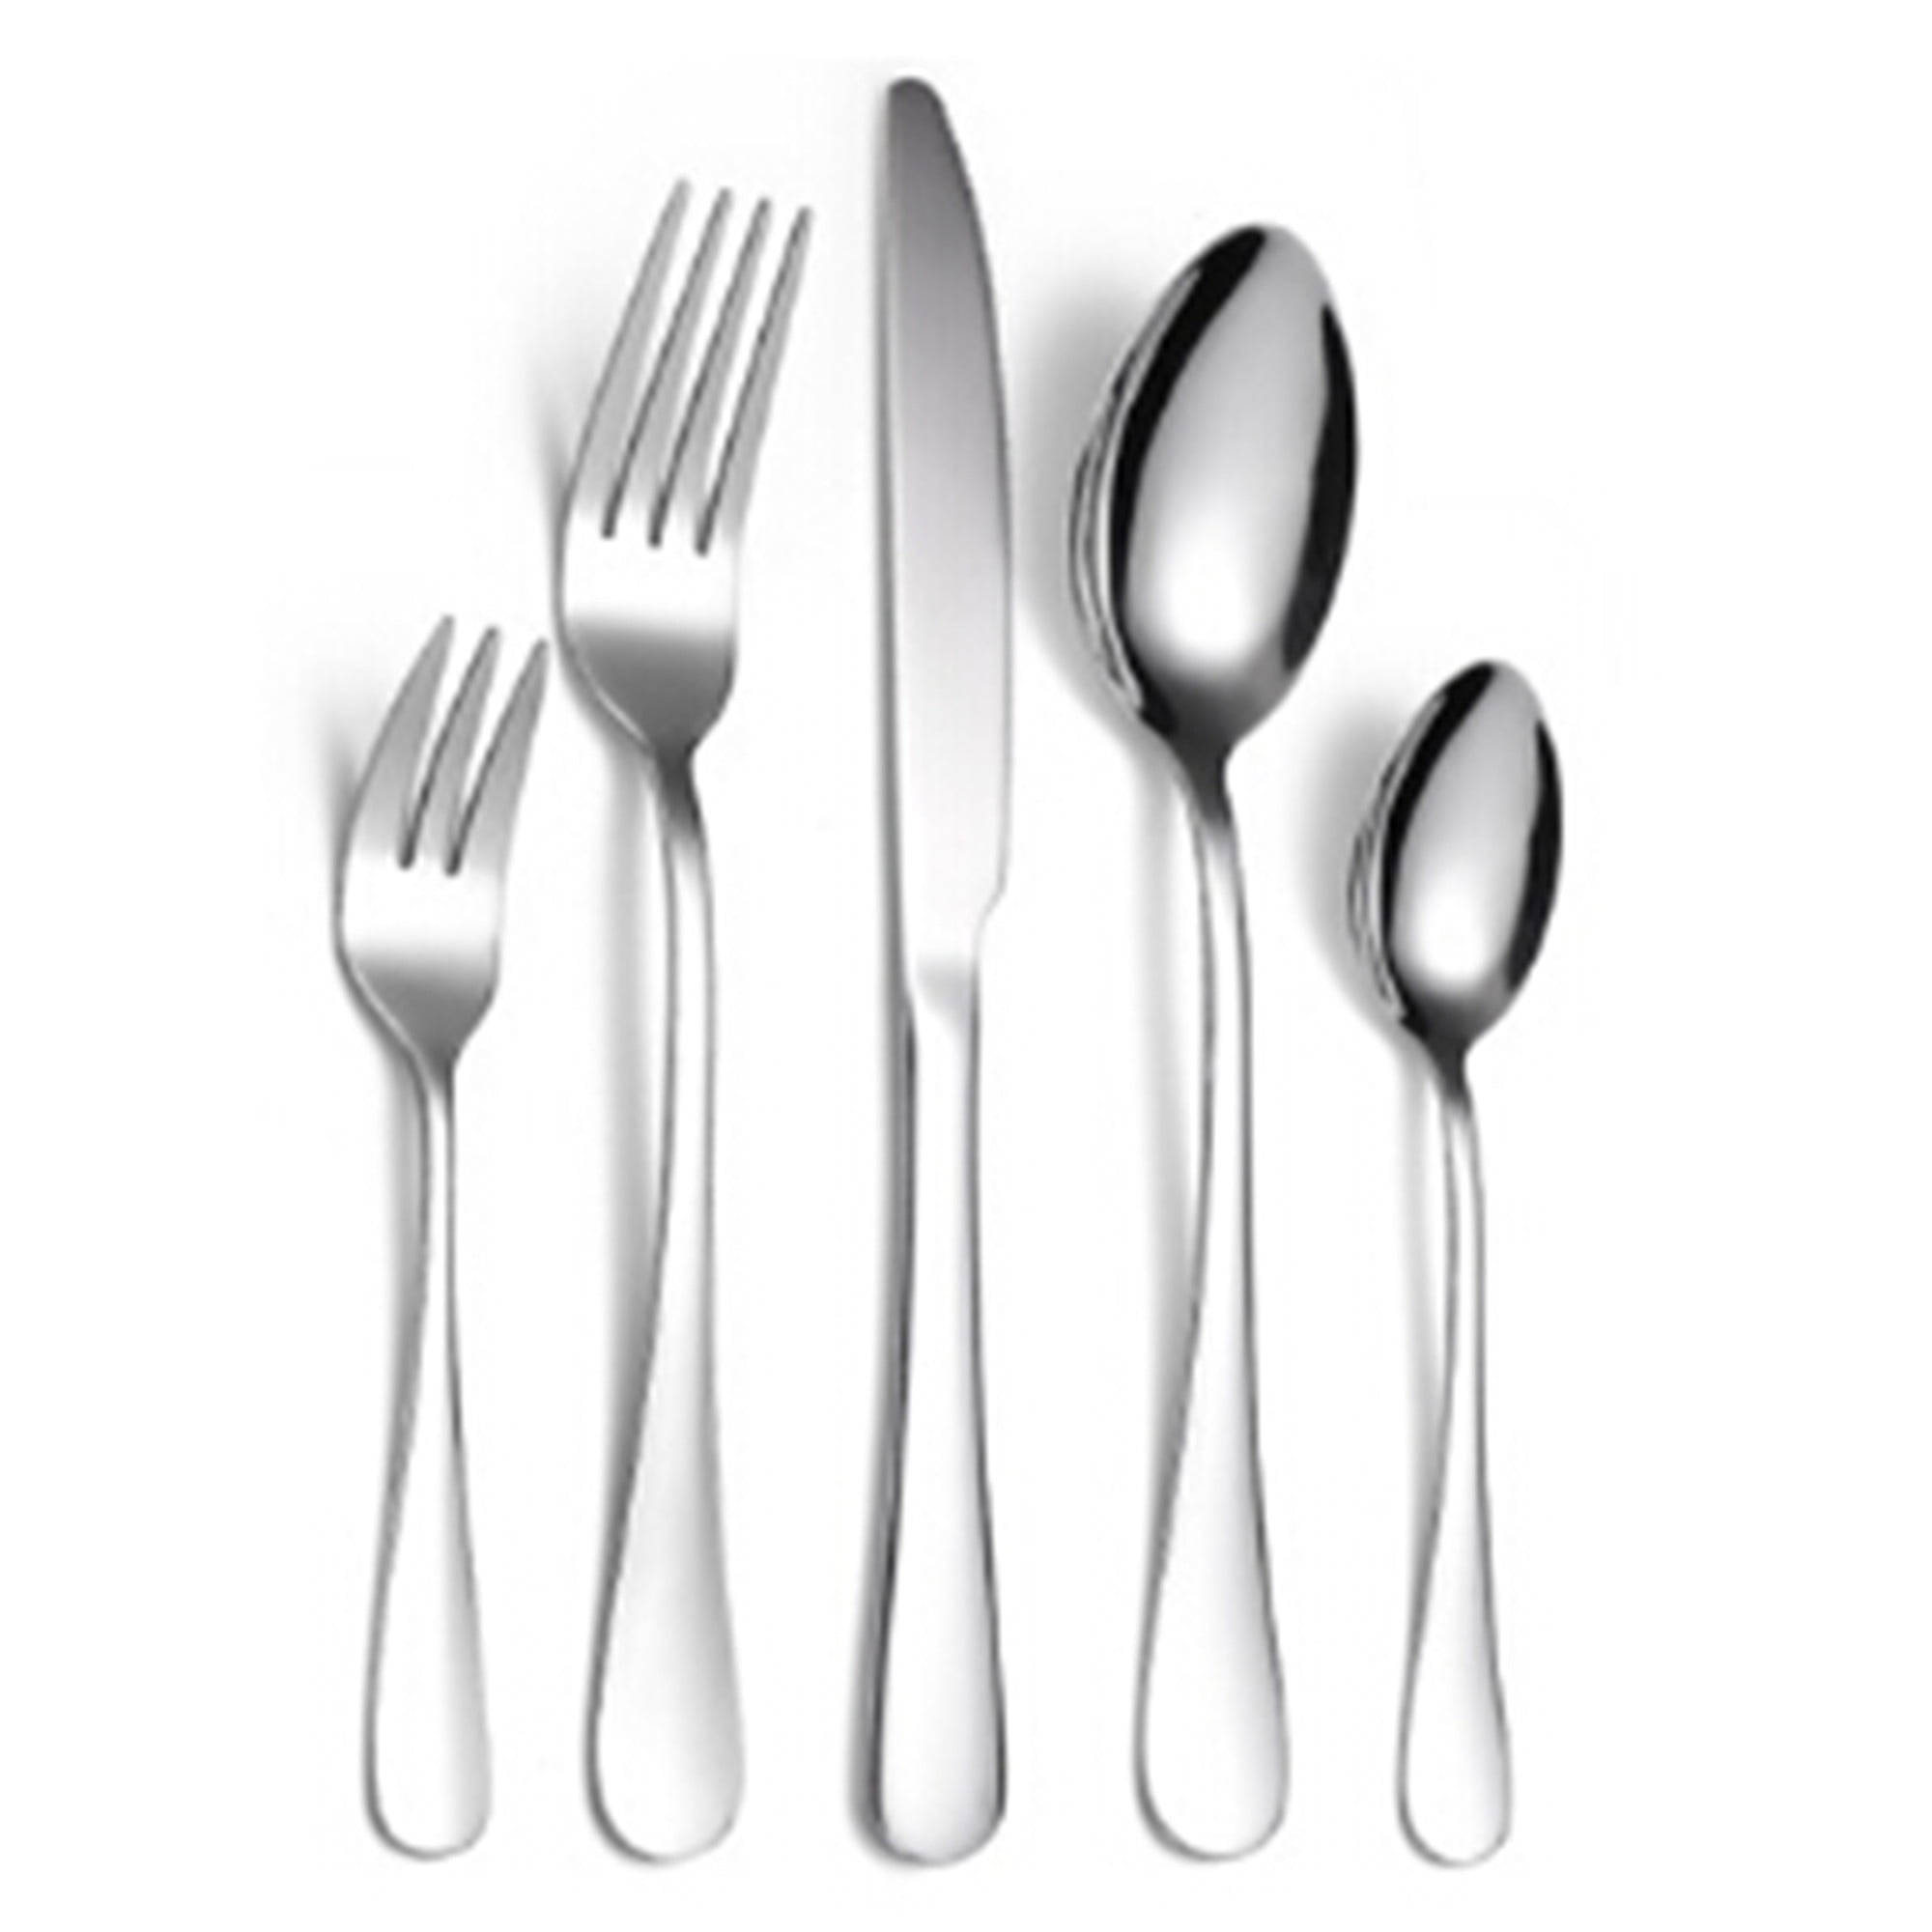 Ook jeans Afleiden Zoiuytrg 5 Piece Stainless Steel Modern Flatware Set, Home Hotel Restaurant  Cutlery Set, Include Knife/Fork/Spoon, Mirror Polished - Walmart.com